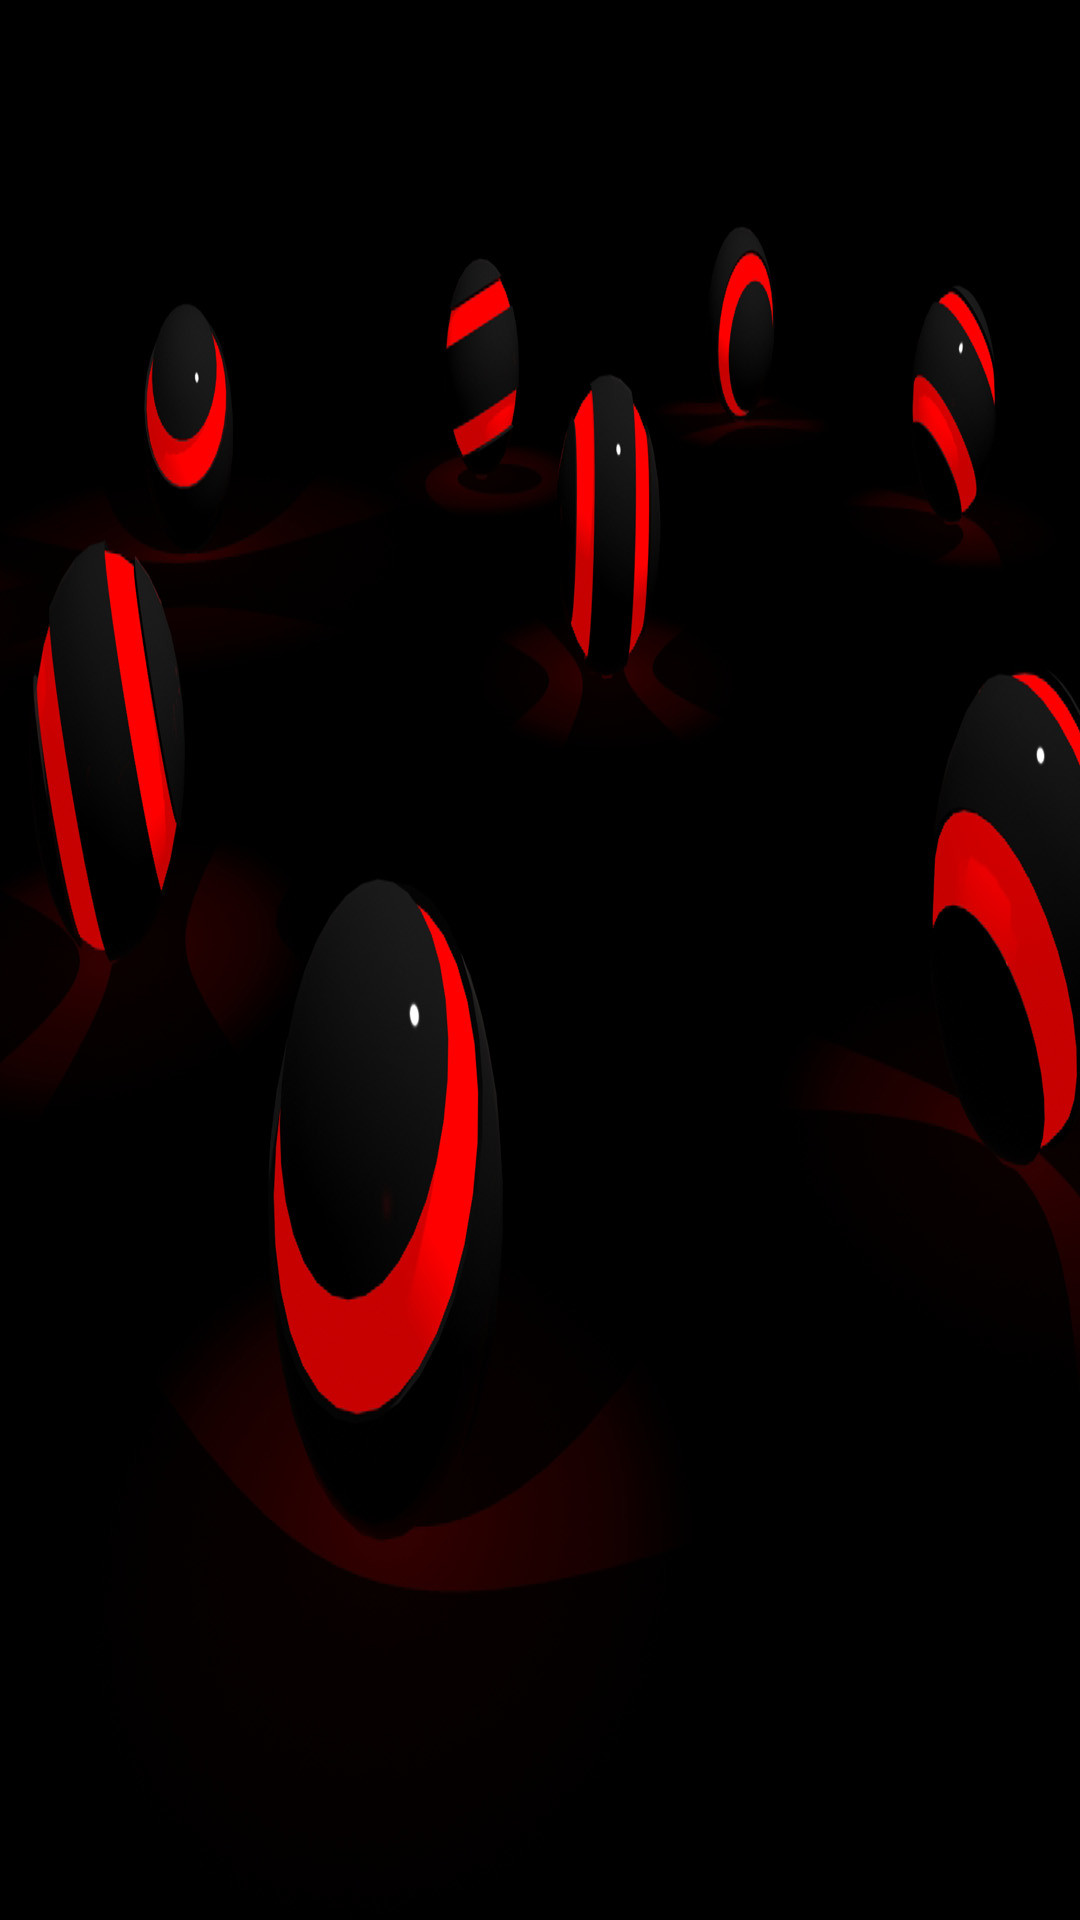 1080x1920 ... Free HD Black And Red Wallpapers - Page 3 of 3 - wallpaper.wiki ...